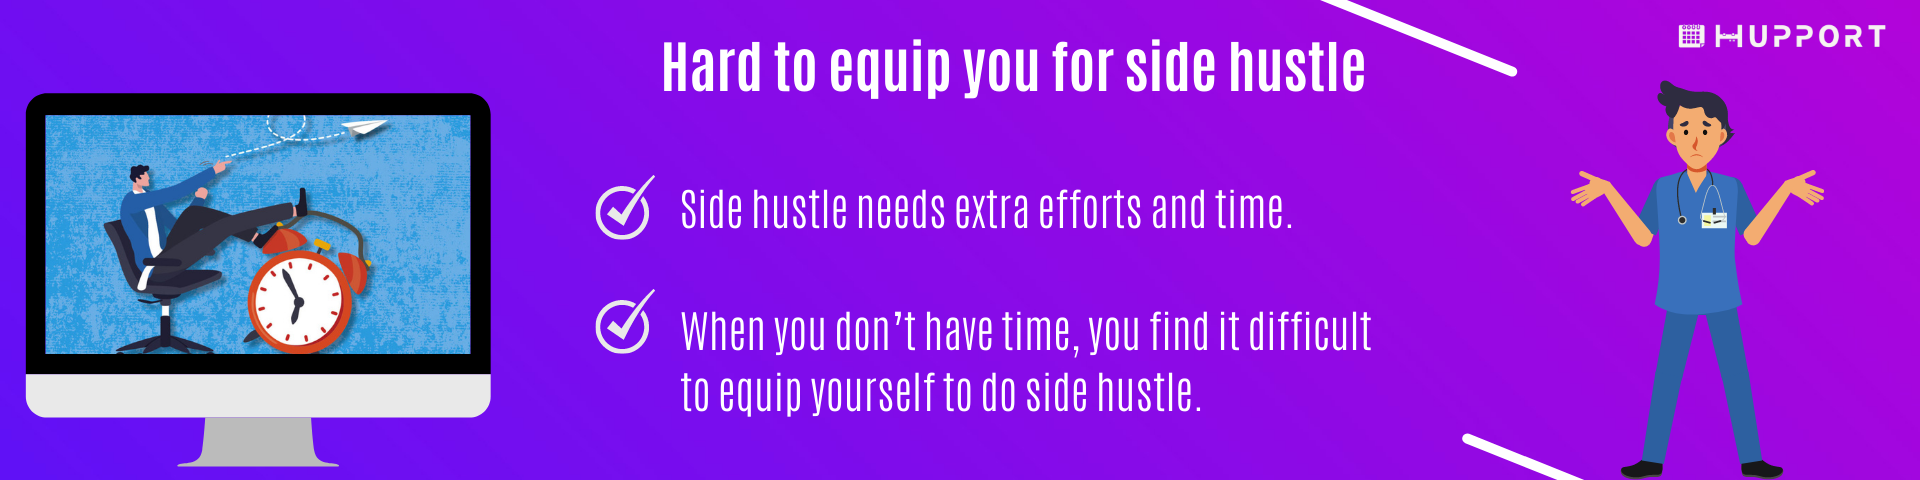 Hard to equip you for side hustle